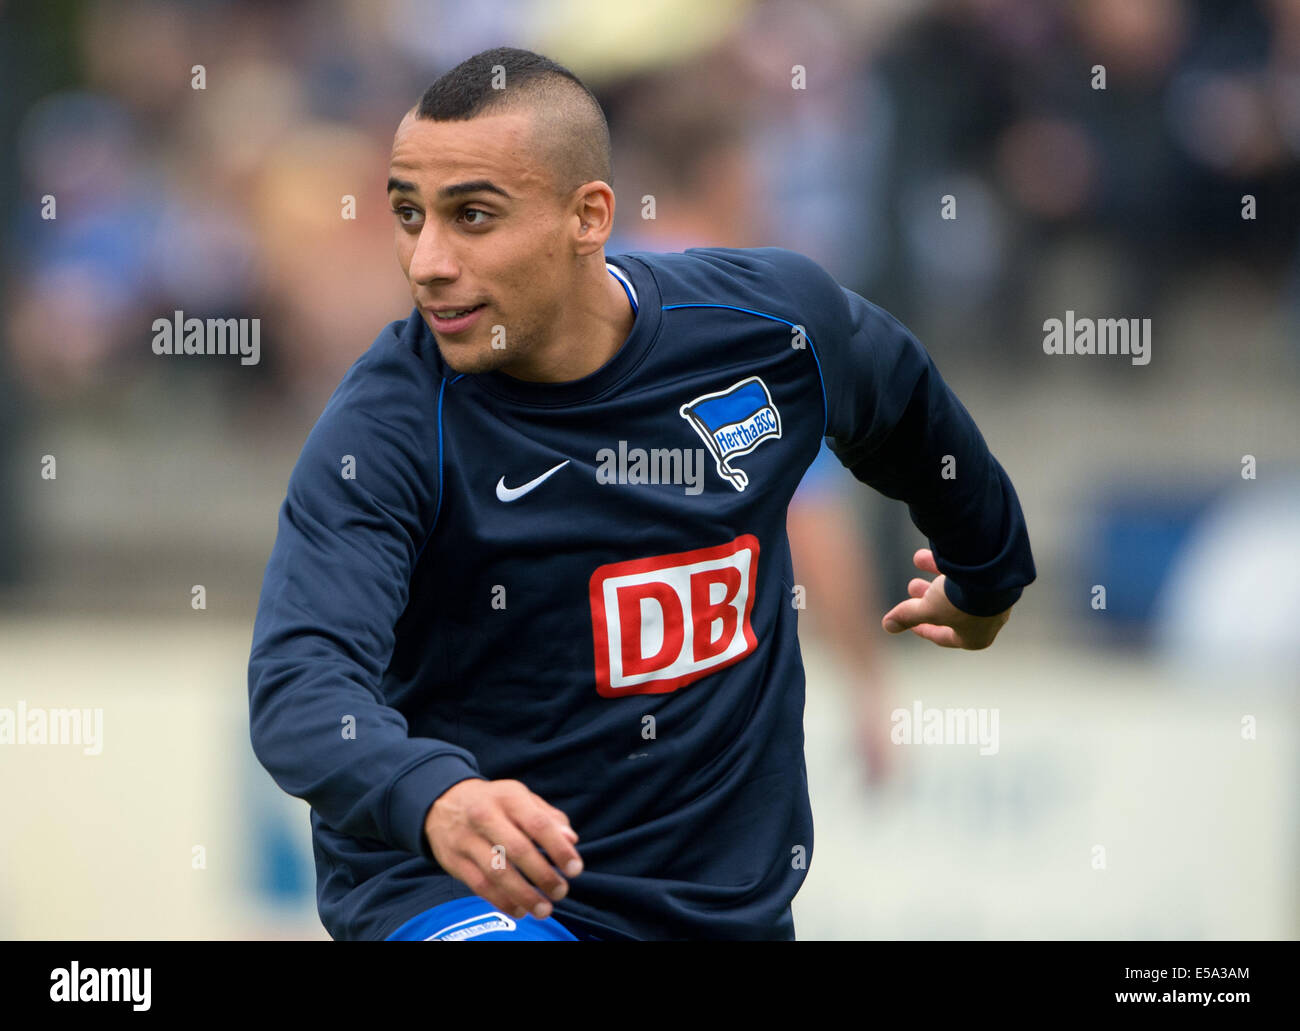 Berlin, Germany. 24th July, 2014. Hertha's Anis Ben-Hatira warms up during the friendly match Hertha BSC against PSV Eindhoven at Stadion auf dem Wurfplatz in Berlin, Germany, 24 July 2014. Photo: SOEREN STACHE/dpa/Alamy Live News Stock Photo